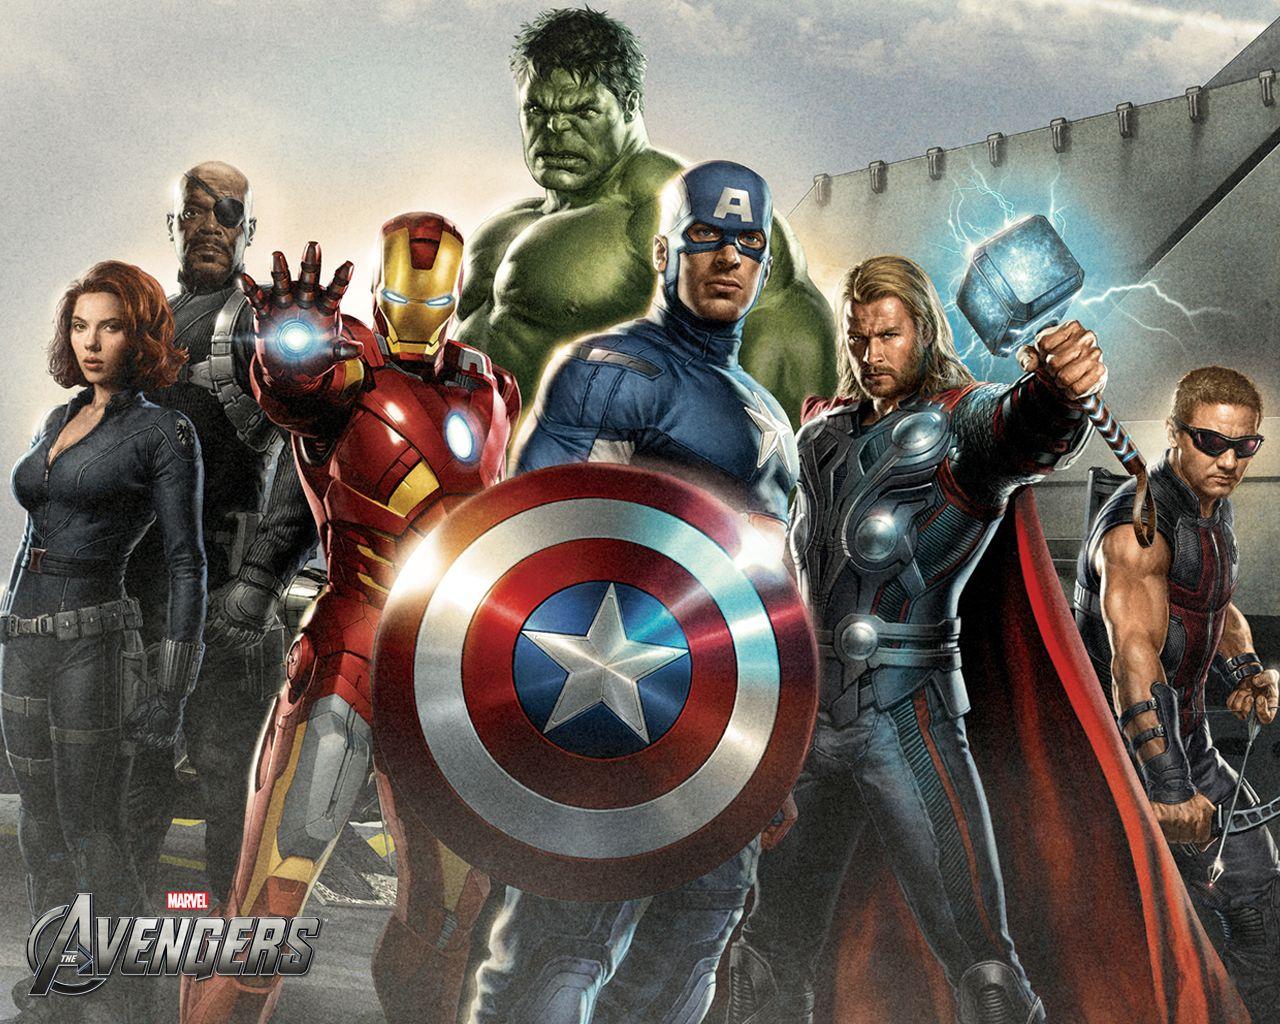 Awesome! These New AVENGERS Wallpaper Image Assemble!. Rama's Screen